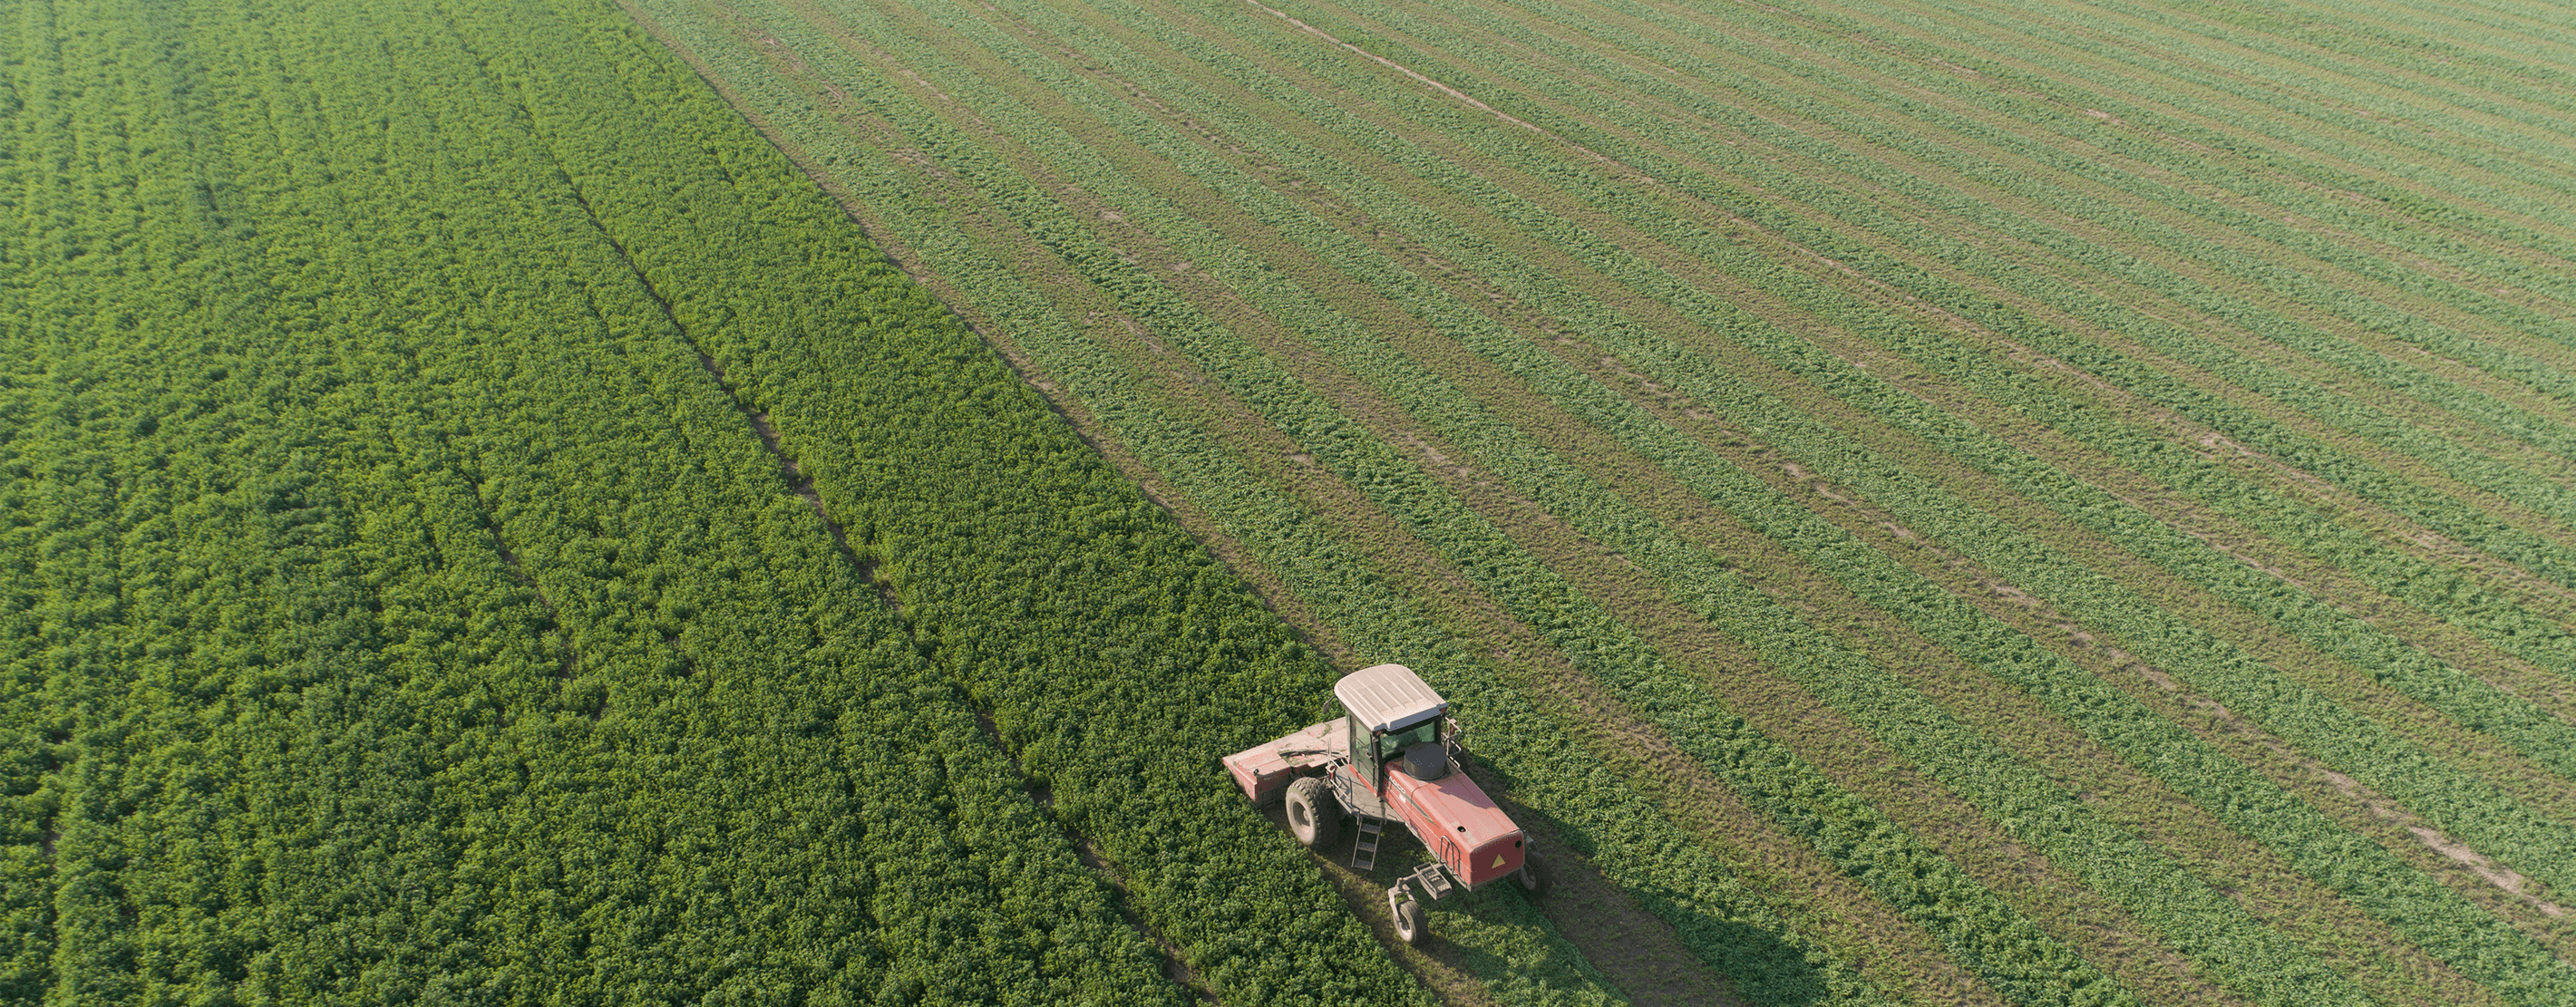 An Aerial View Of A Tractor In The Field Harvesting